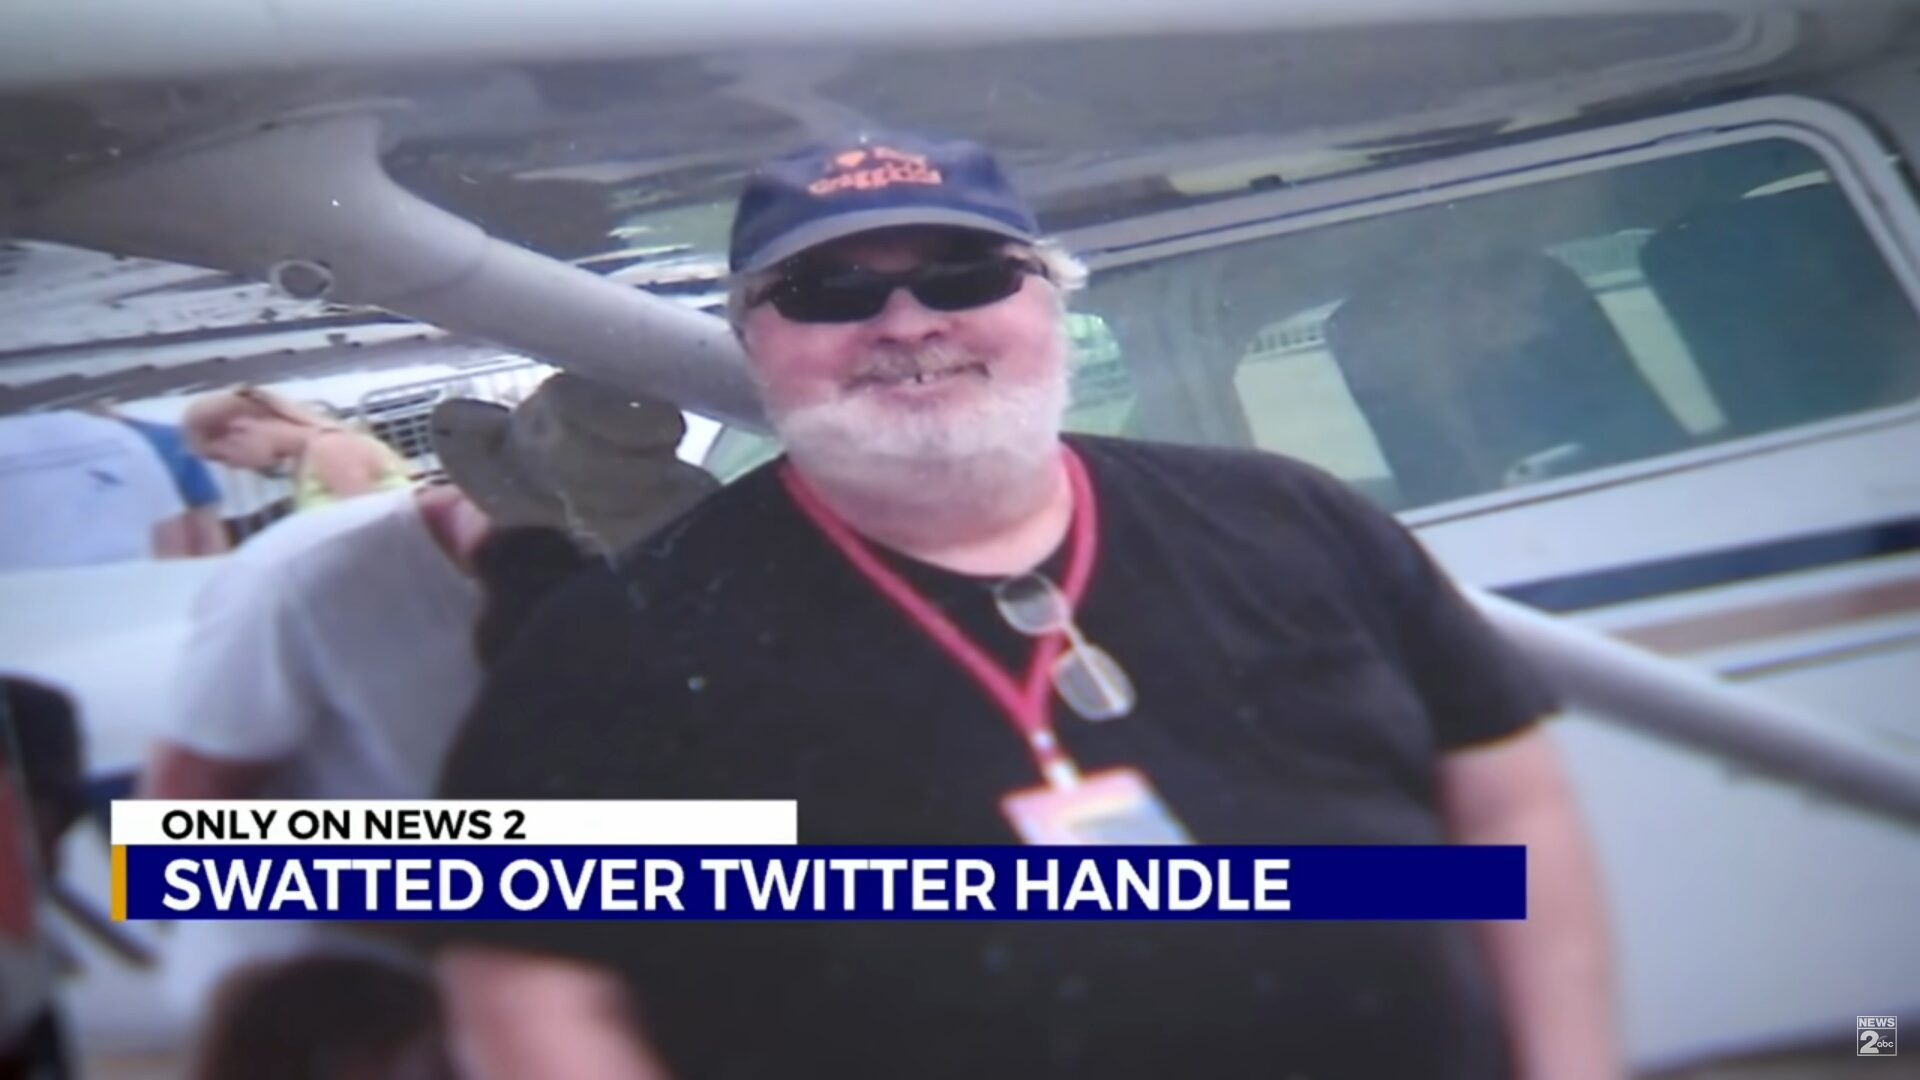 Man Dies Of Heart Attack Mid-SWATting Brought On By Refusing To Be Extorted For Twitter Handle